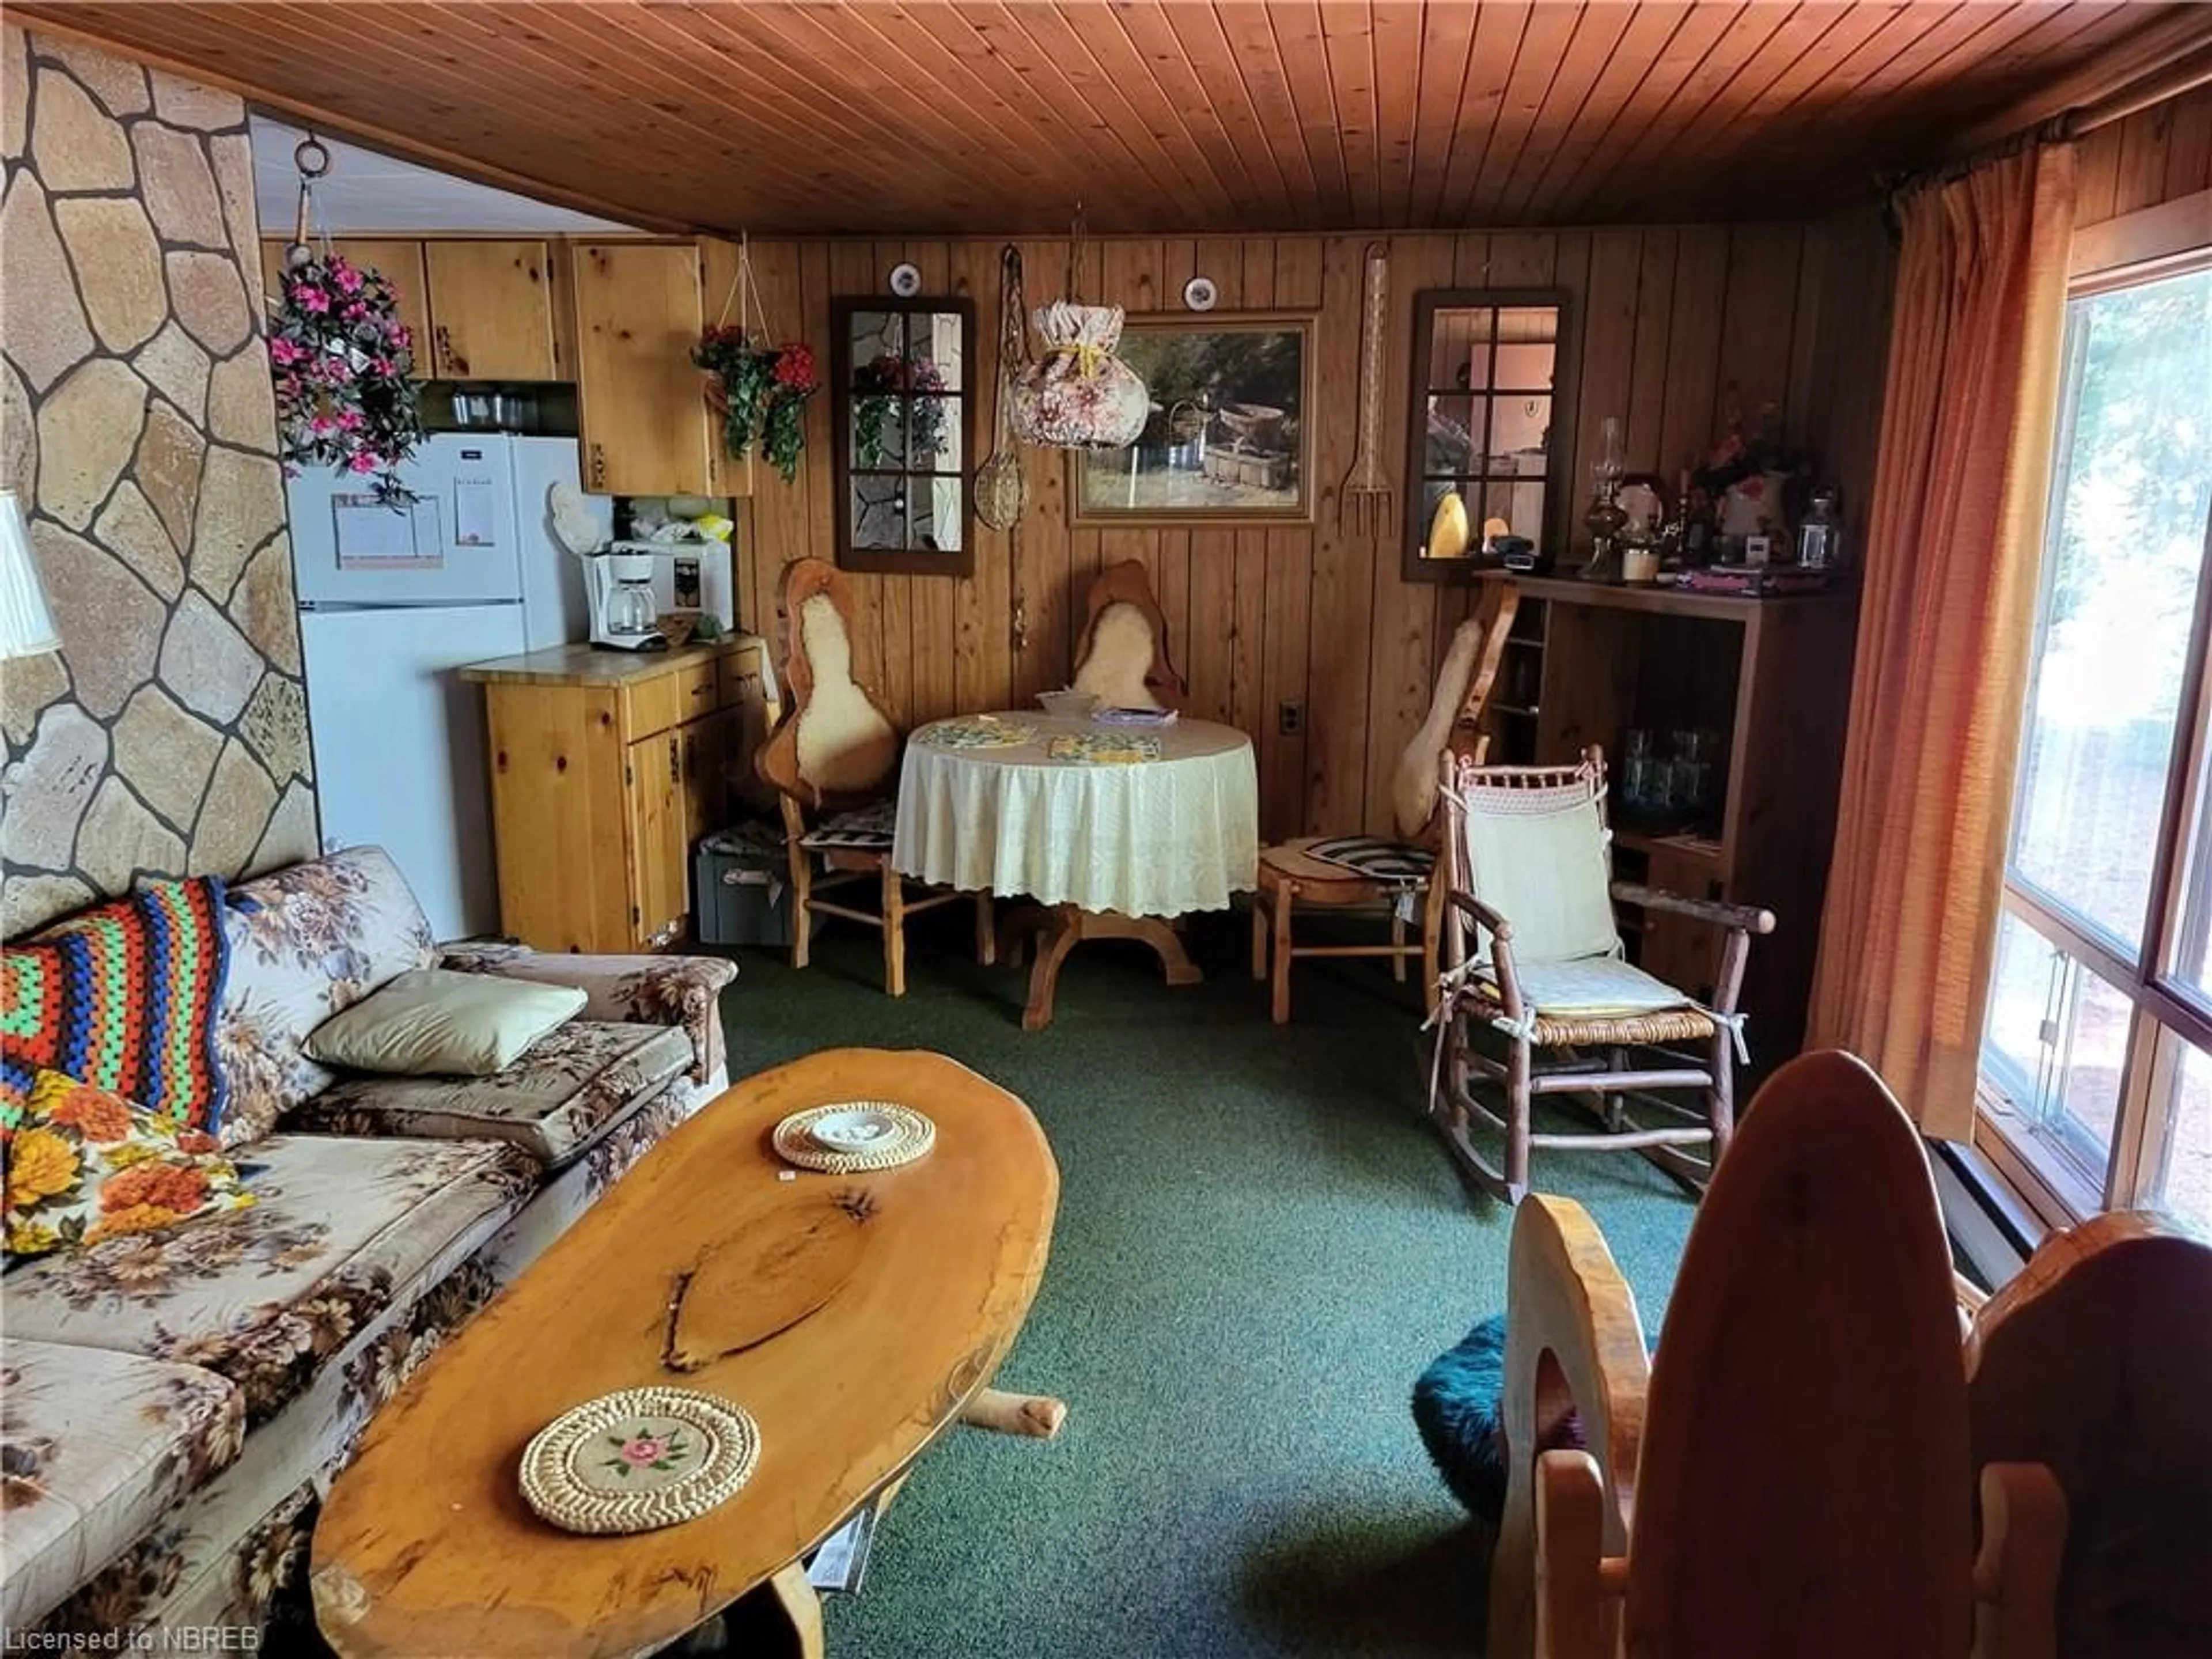 A pic of a room for 2 Lake Temagami Island 939, Temagami Ontario P0H 2H0